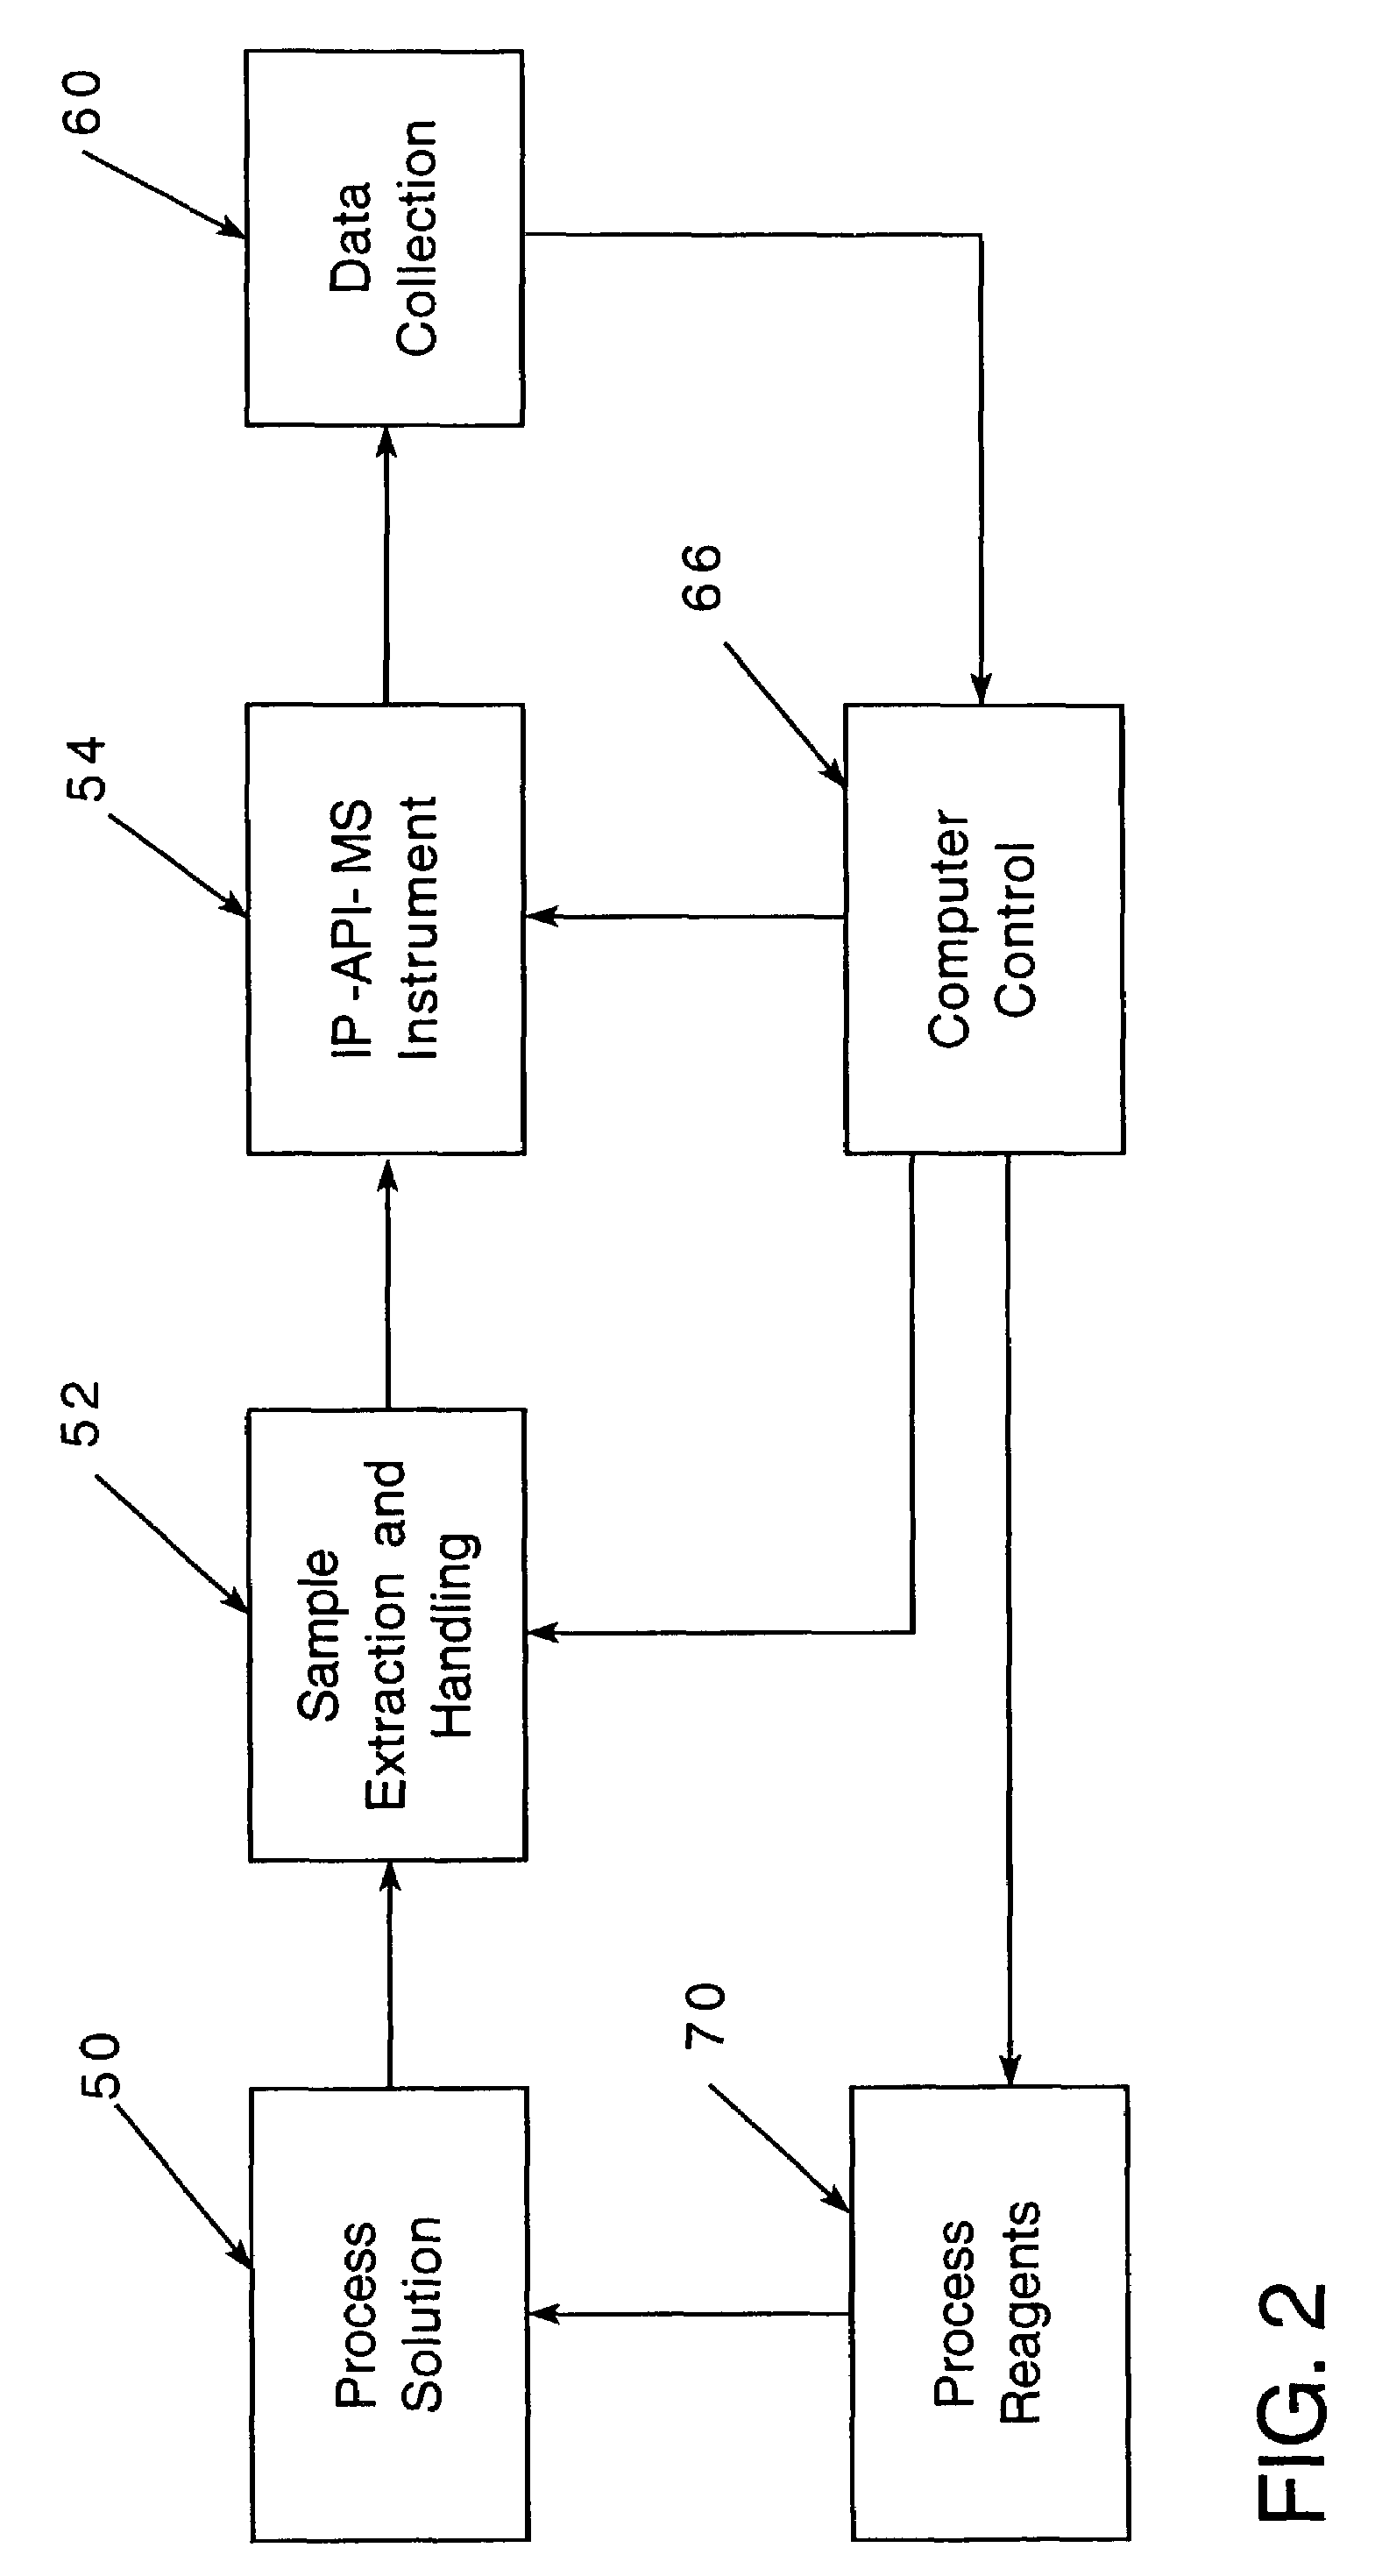 Method and apparatus for automated analysis and characterization of chemical constituents of process solutions